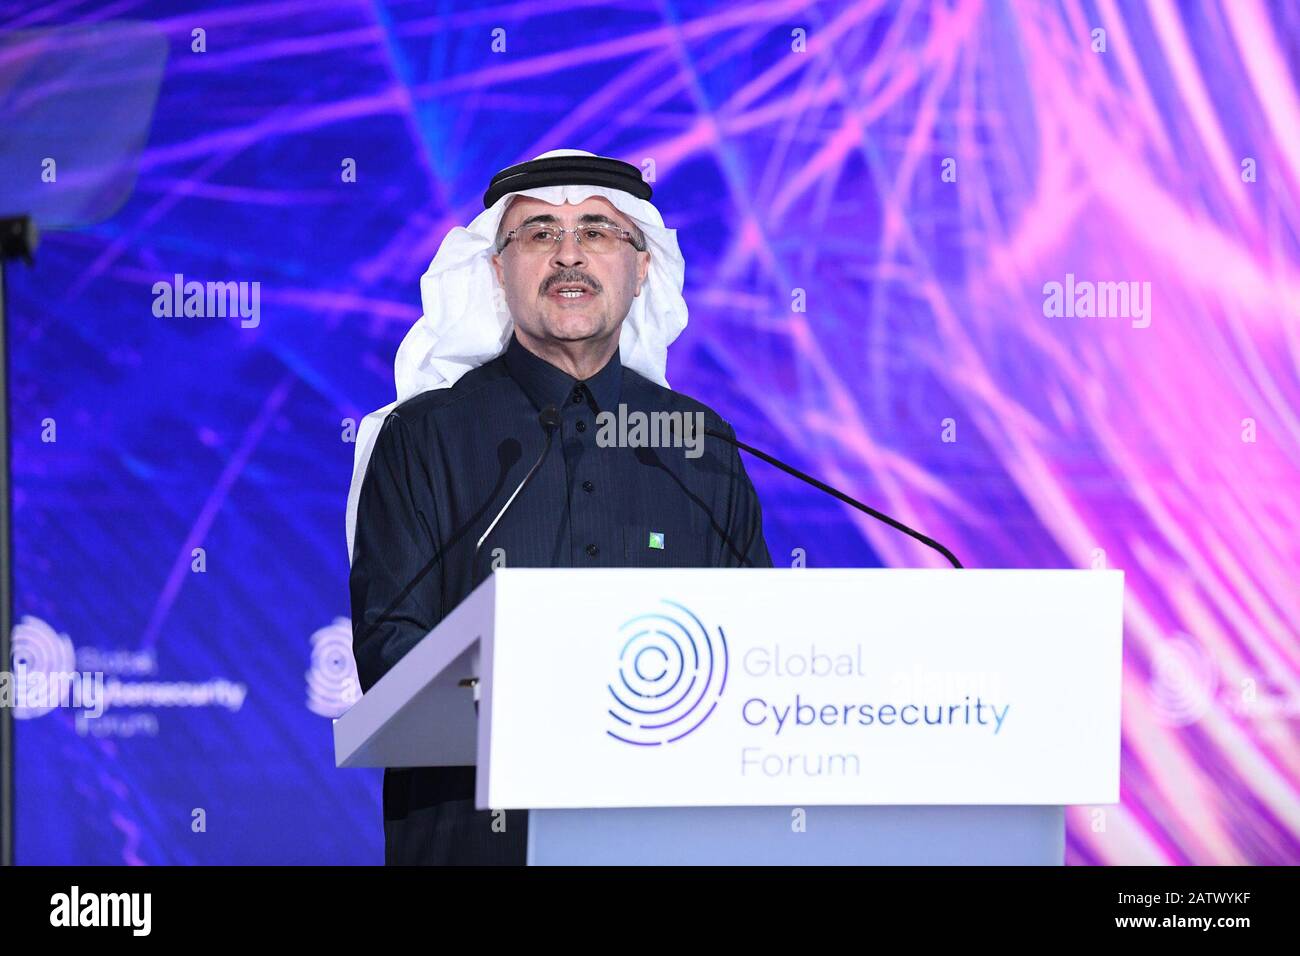 (200205) -- RIYADH, Feb. 5, 2020 (Xinhua) -- Aramco President and CEO Amin Nasser speaks at the Global Cybersecurity Forum in Riyadh, Saudi Arabia, Feb. 4, 2020. Saudi Arabia's oil giant Aramco on Tuesday emphasized the constantly-evolving threat of cyber-terrorism to governments, businesses and individuals, urging stronger cooperation in this sphere. (Saudi Aramco/Handout via Xinhua) Stock Photo